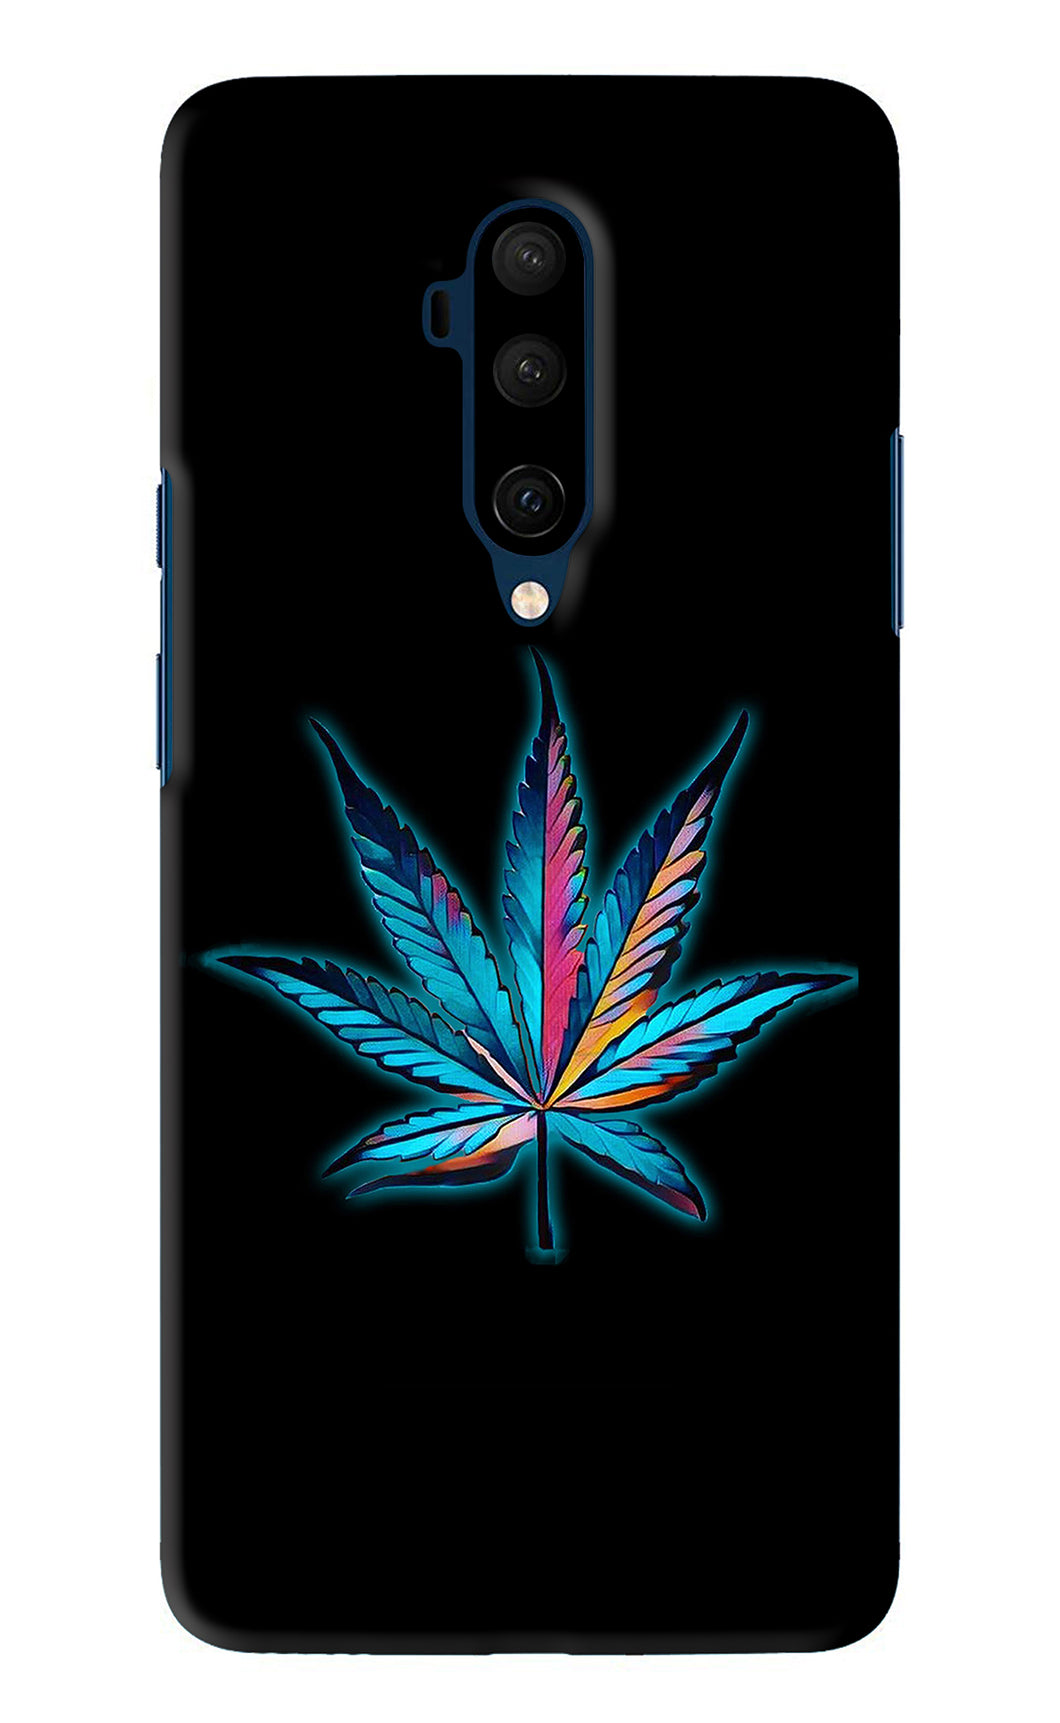 Weed OnePlus 7T Pro Back Skin Wrap